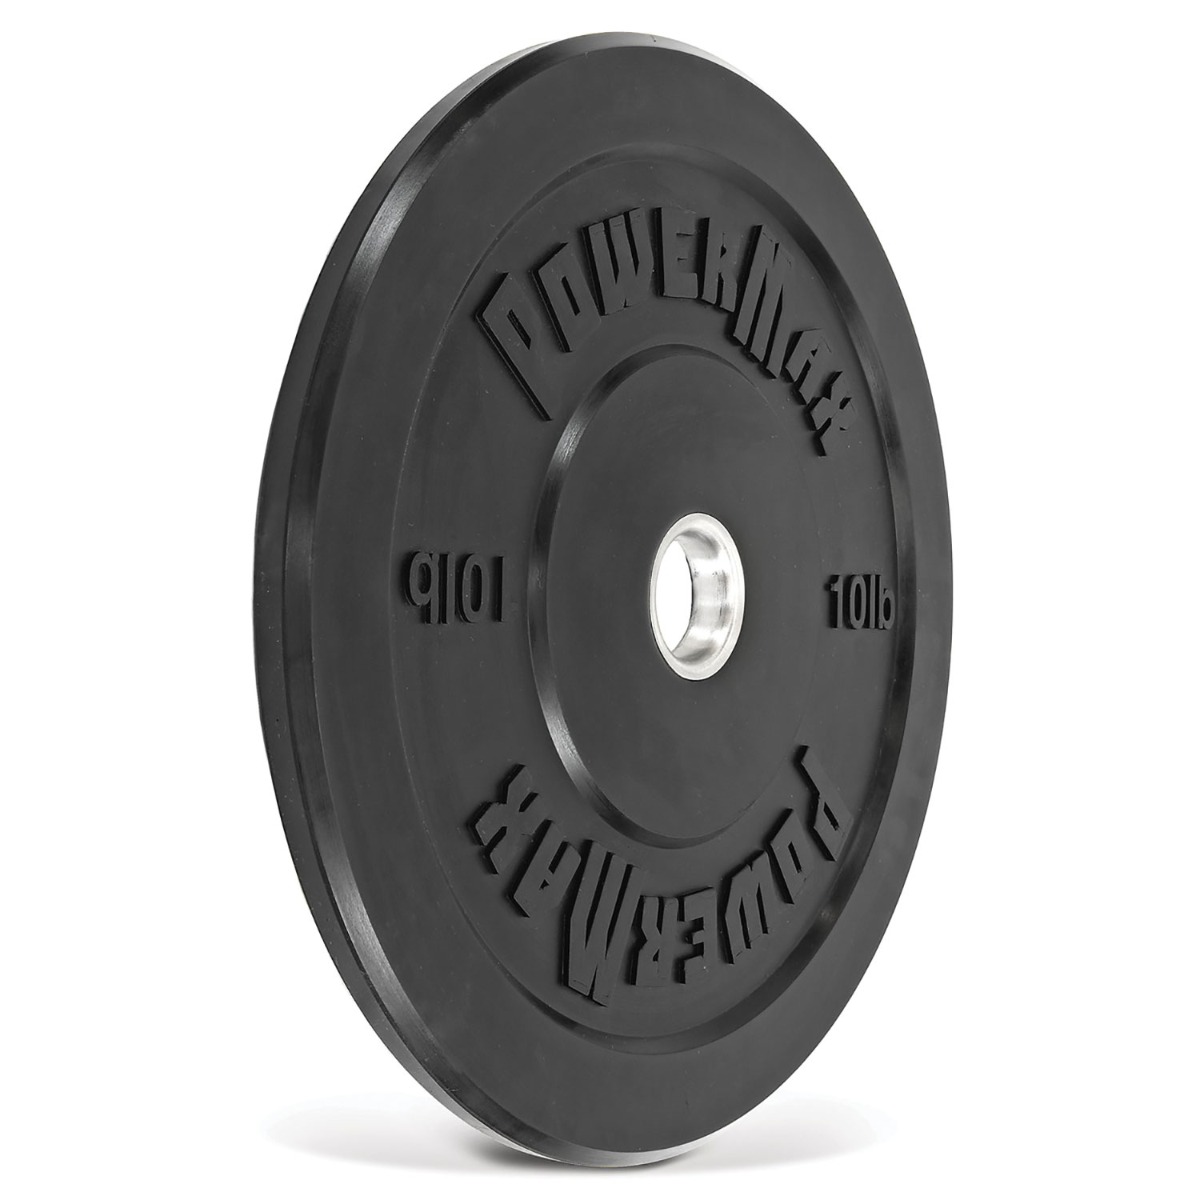 Pair of 10-lb. Olympic Bumper Plates